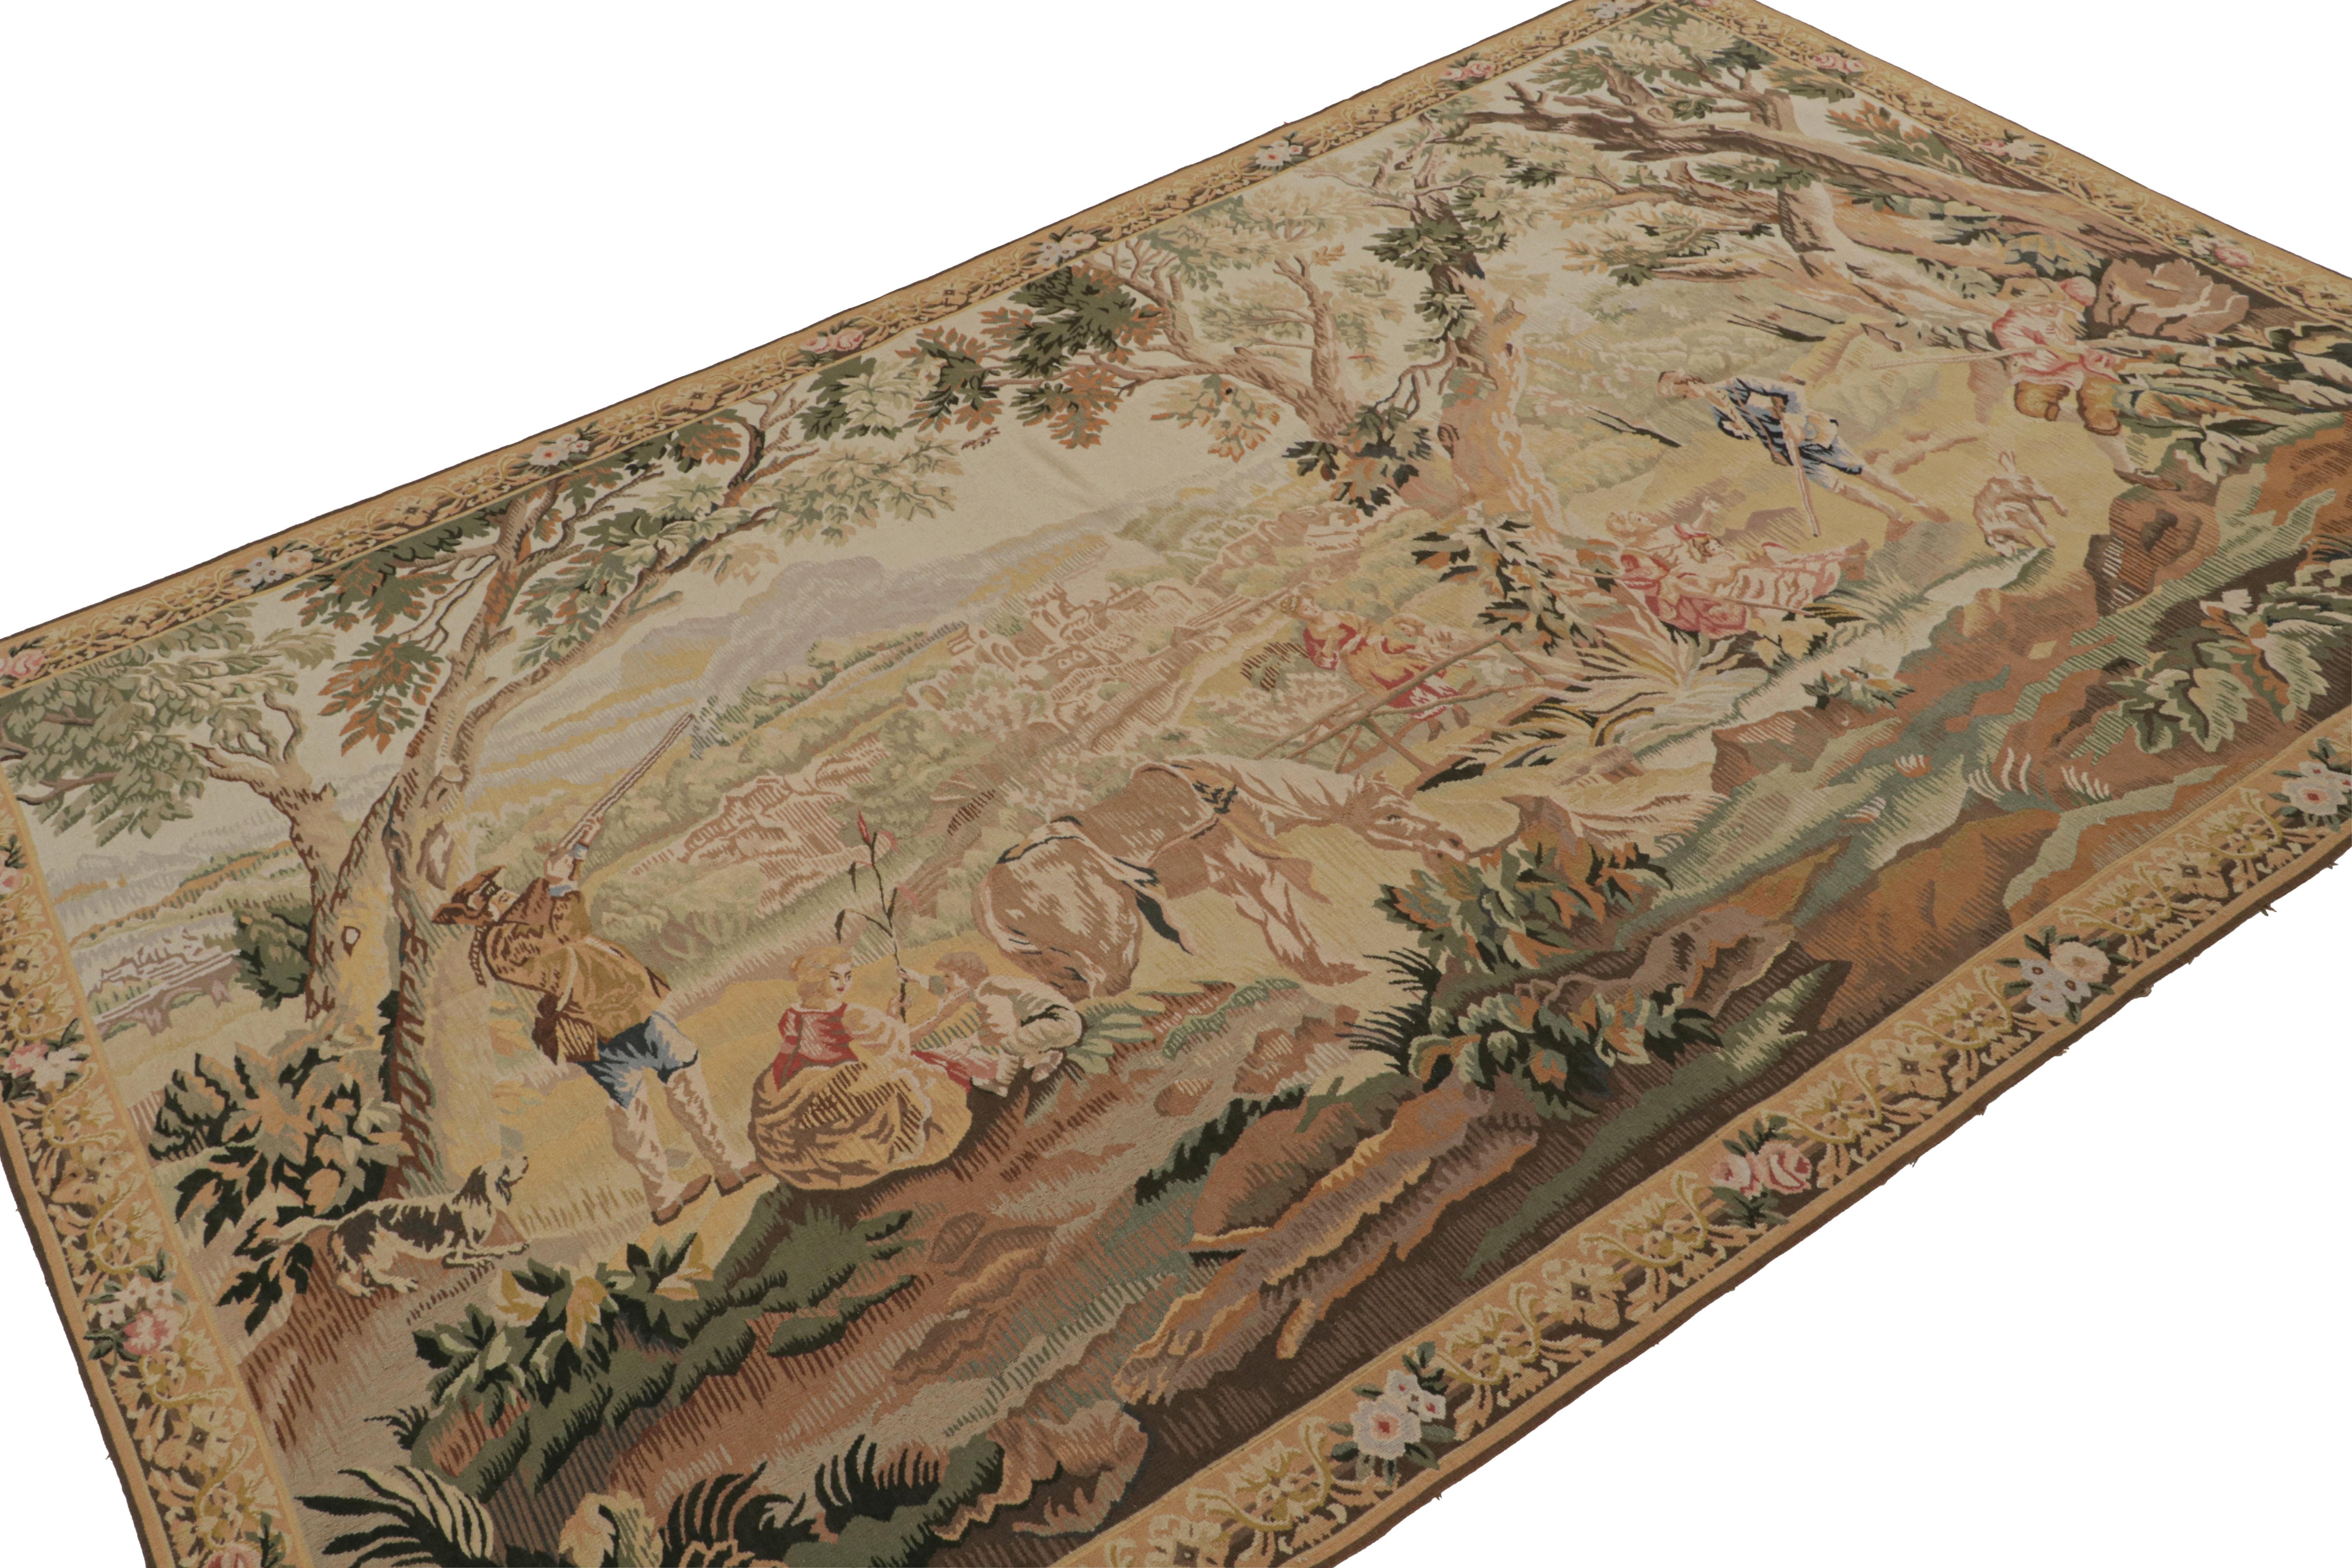 Hand-knotted in wool, this 6x9 European pictorial tapestry in beige/brown, green and pink is a new piece inspired by antique European tapestries. 

On the design: 

Inspired by antique European tapestries, this unique piece depicts a vivid